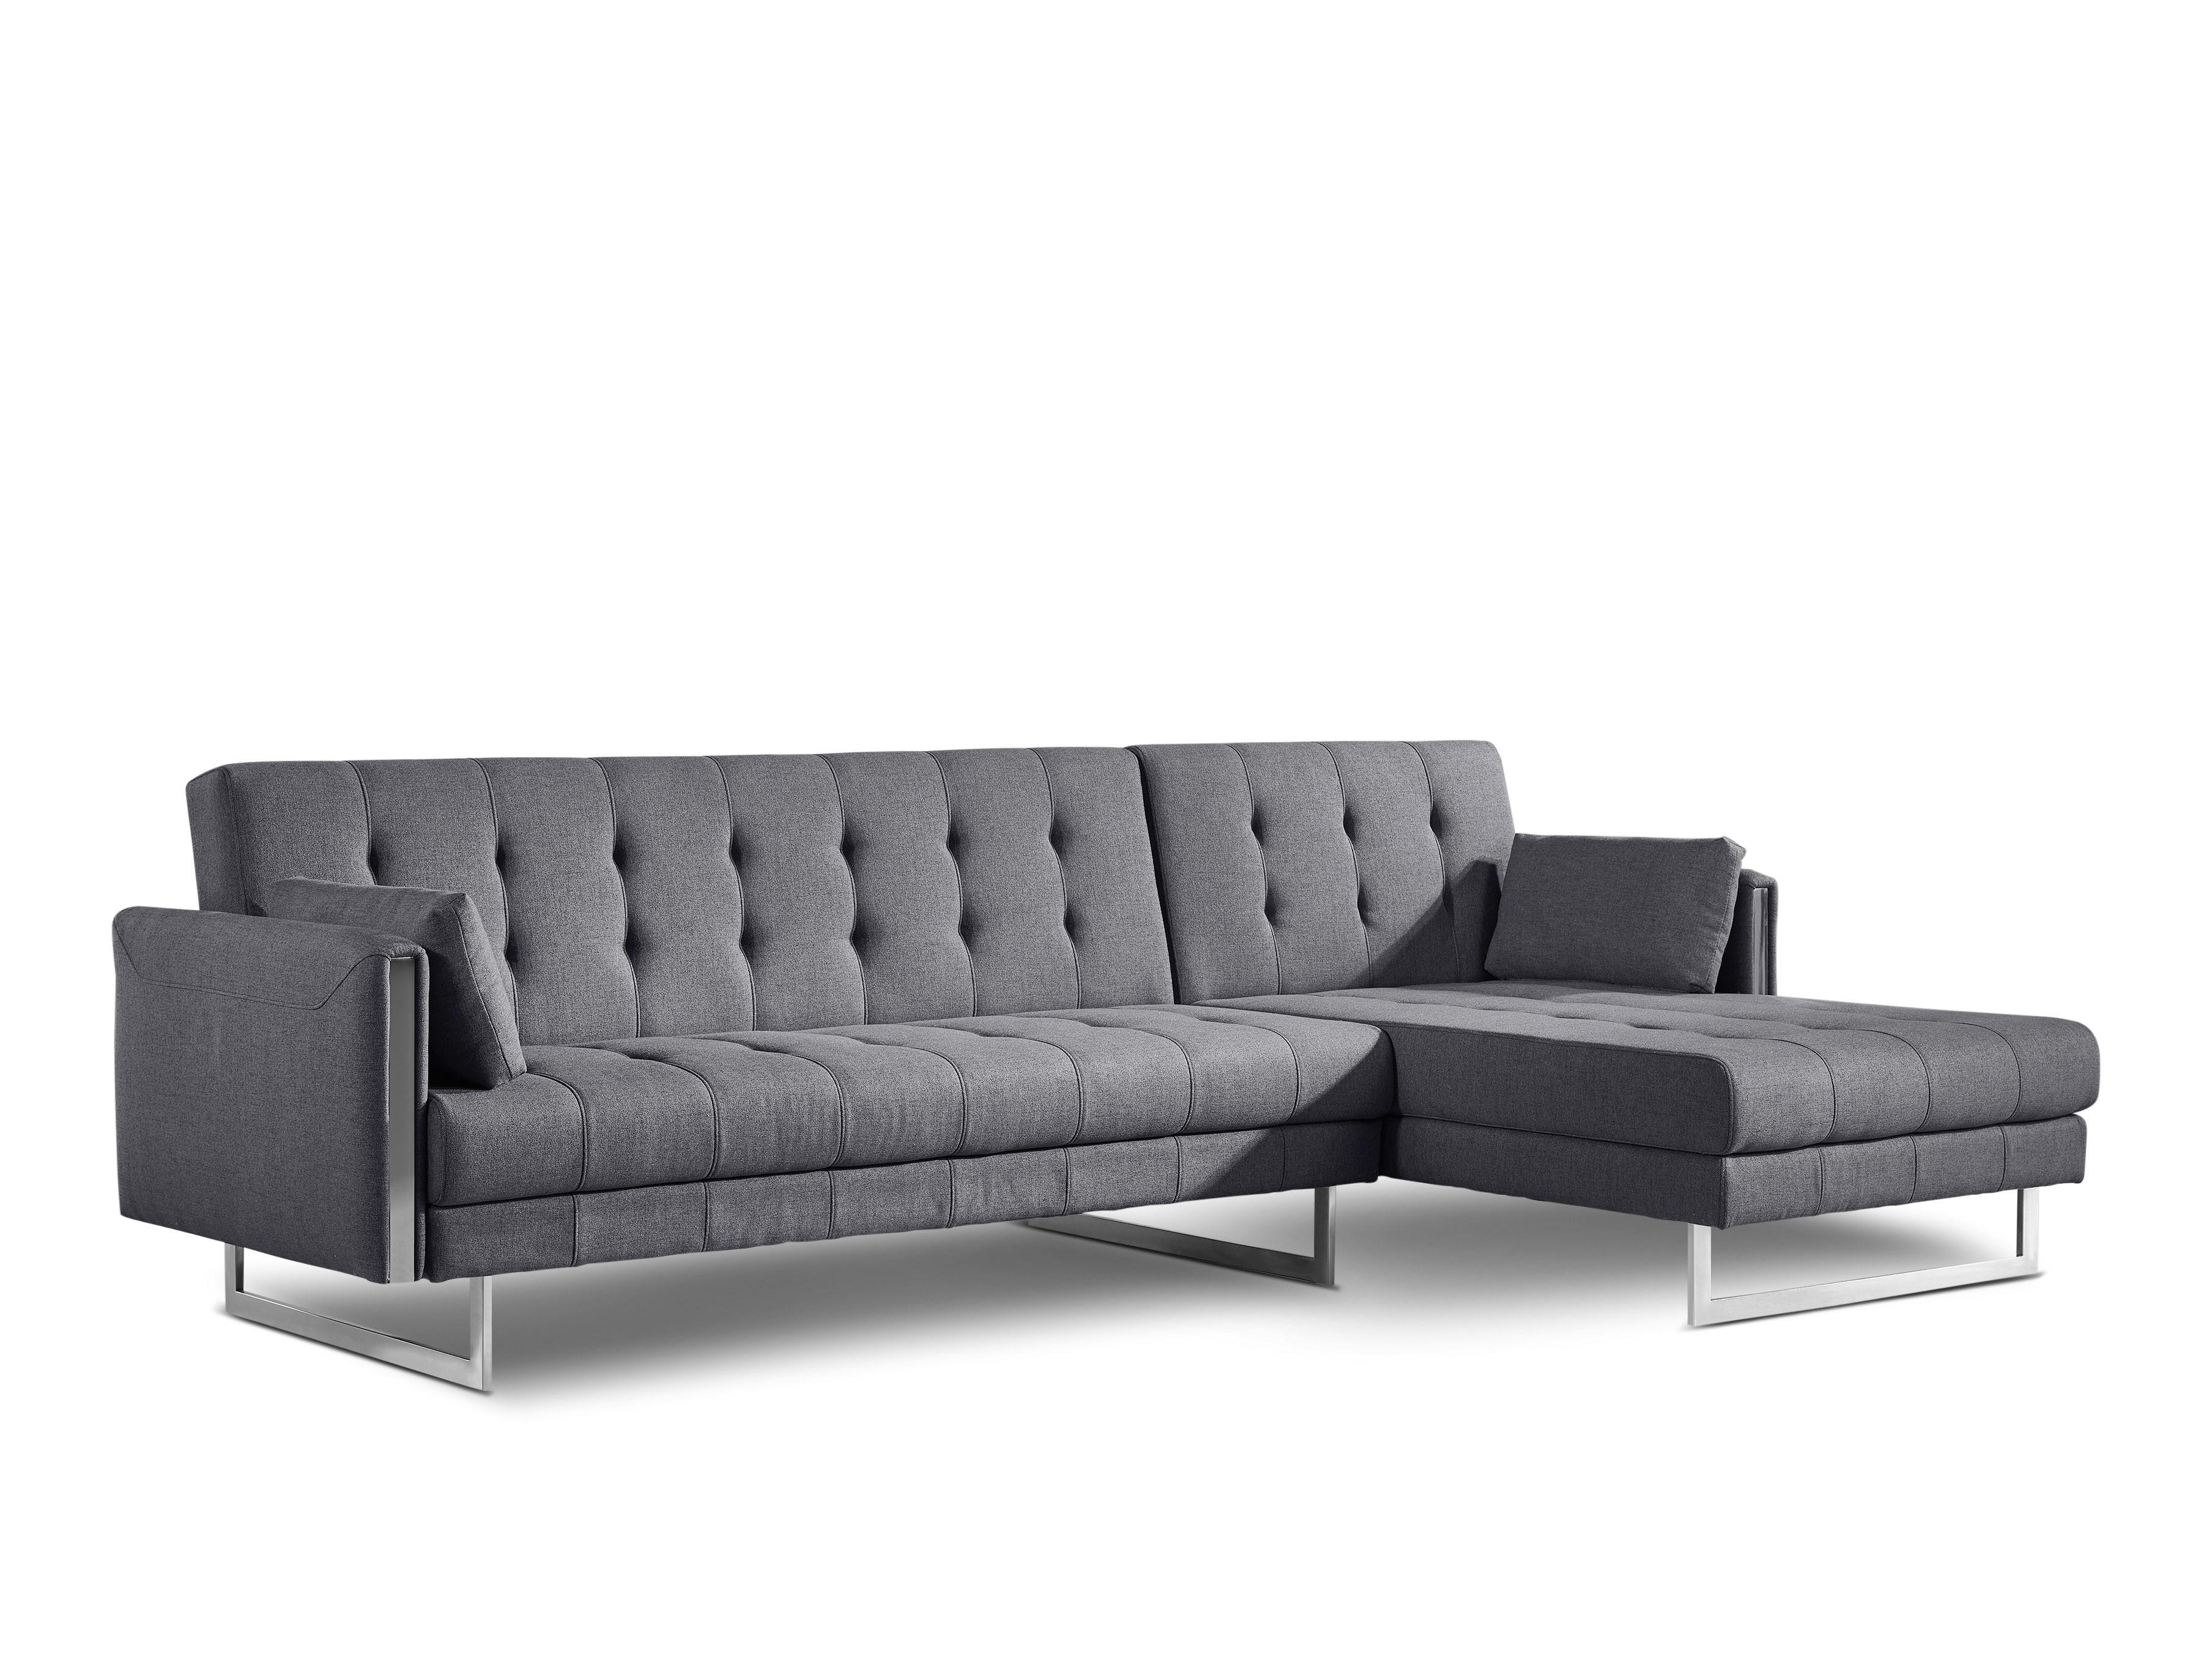 Contemporary Sectional Sofa Bed Andrea AHU-M1600-SEC-ARGR in Gray Fabric